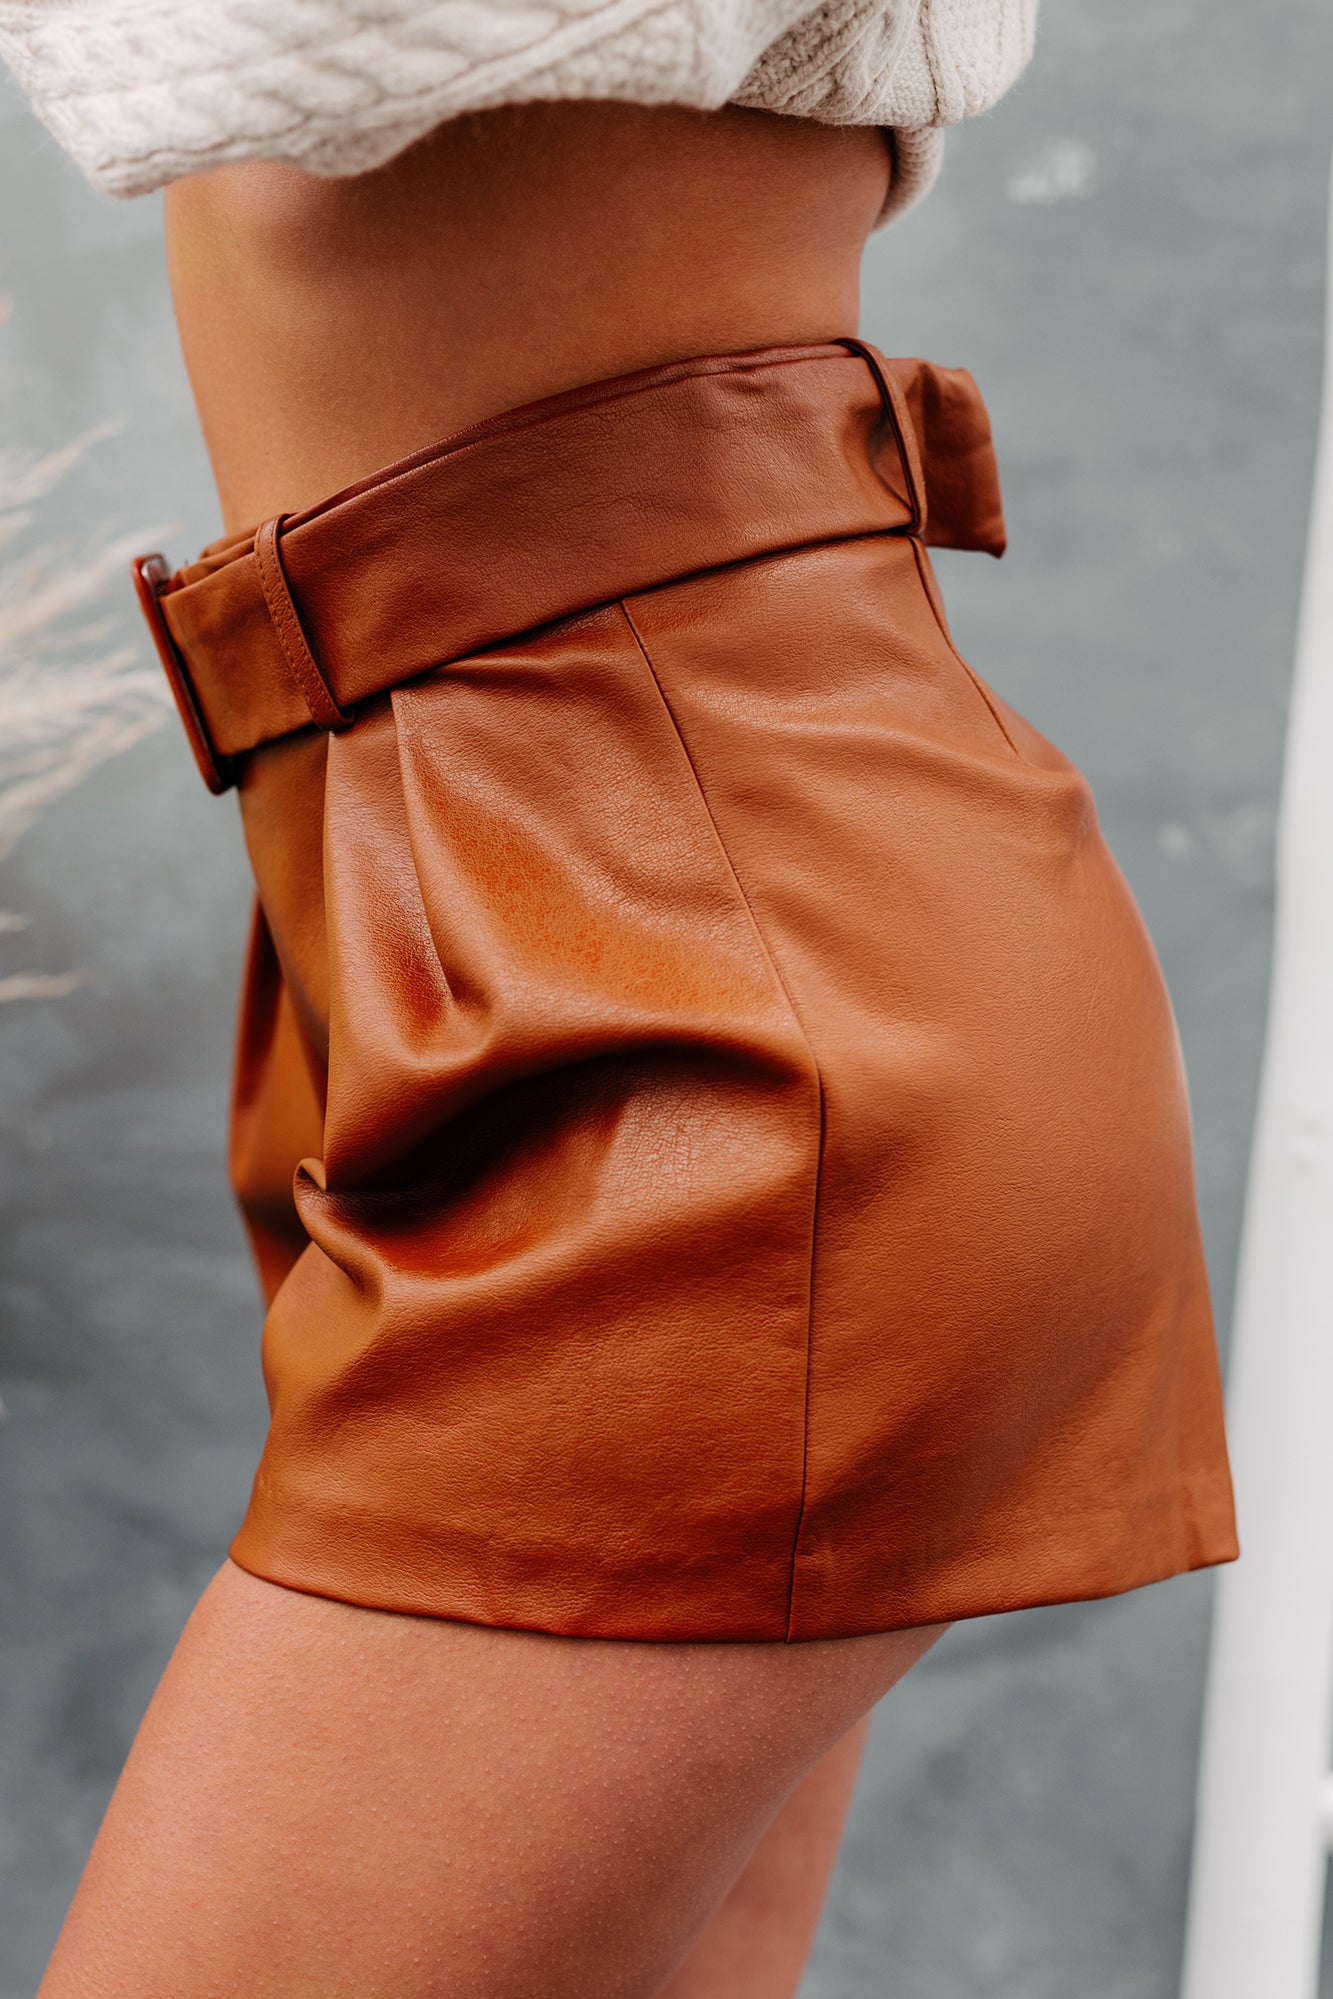 FRAME Leather Shorts In Camel Brown